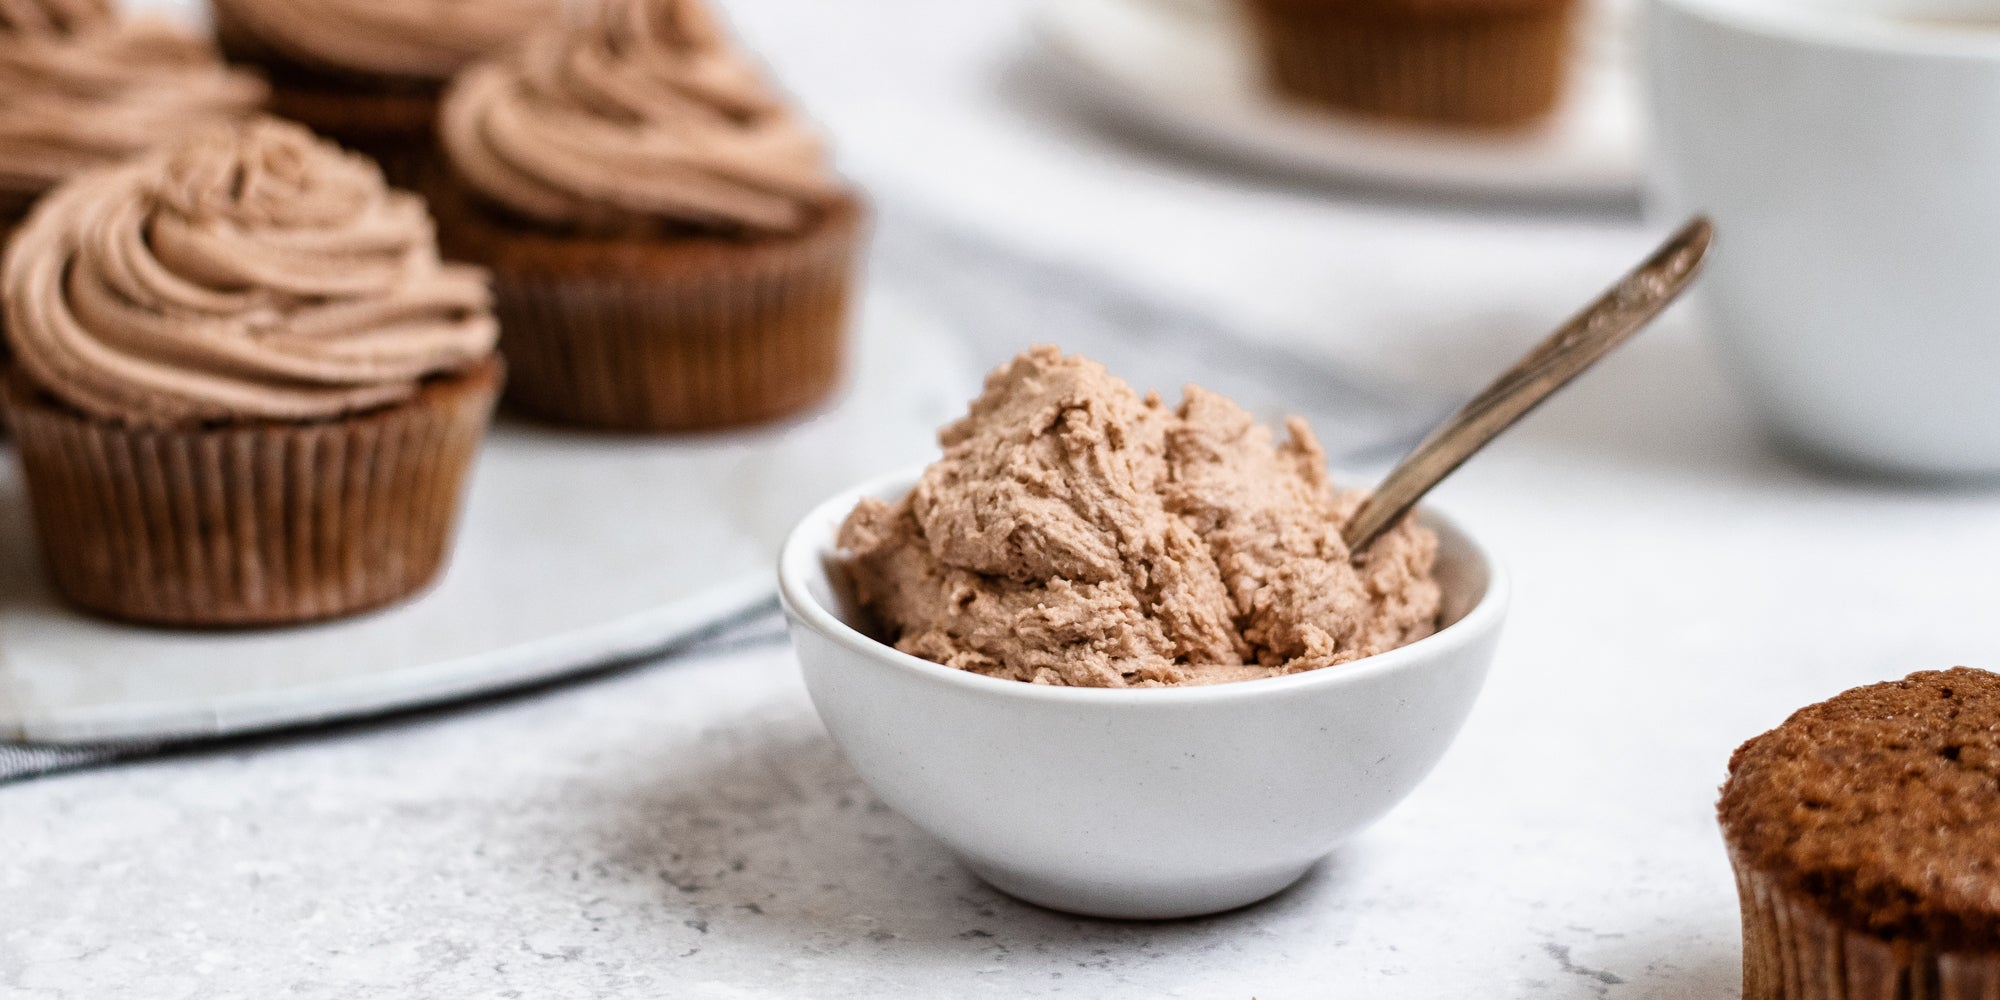 Close up of Dairy Free Vegan Chocolate Buttercream in a small bowl, with a spoon. Cupcakes topped with Dairy Free Vegan Chocolate Buttercream in the background